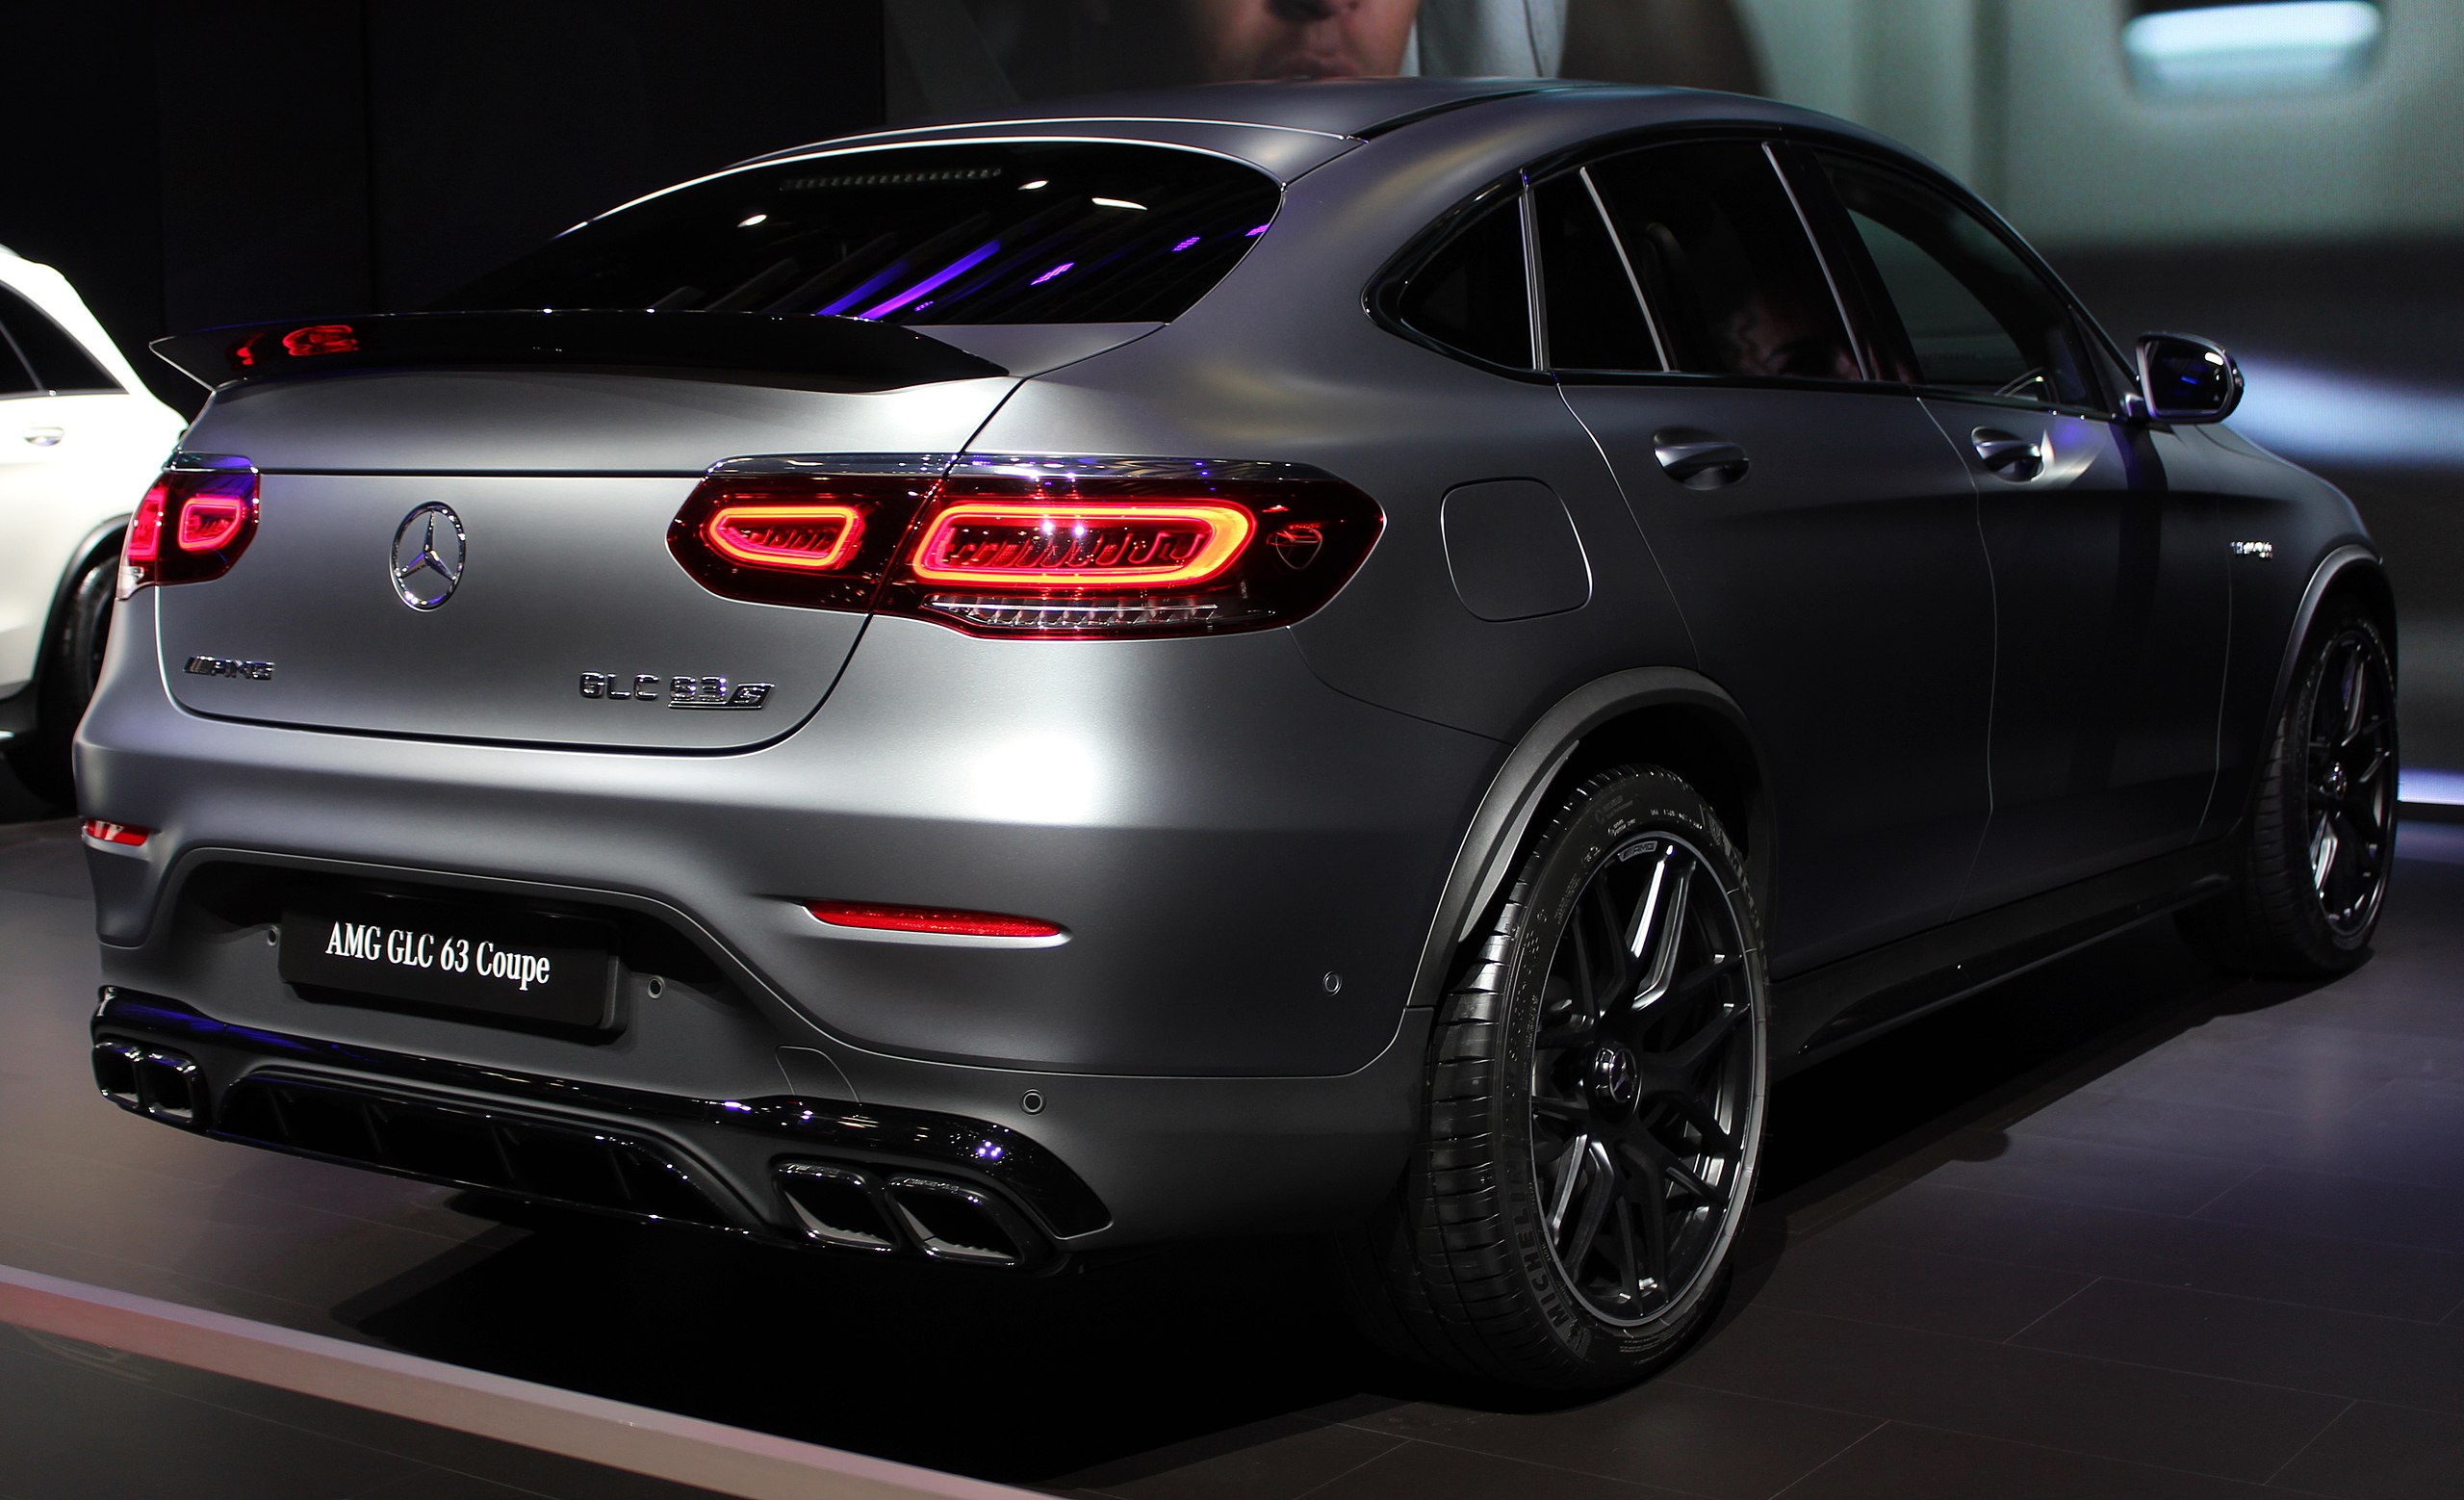 File:2020 Mercedes-AMG GLC 63 S Coupe rear NYIAS 2019.jpg - Wikimedia  Commons